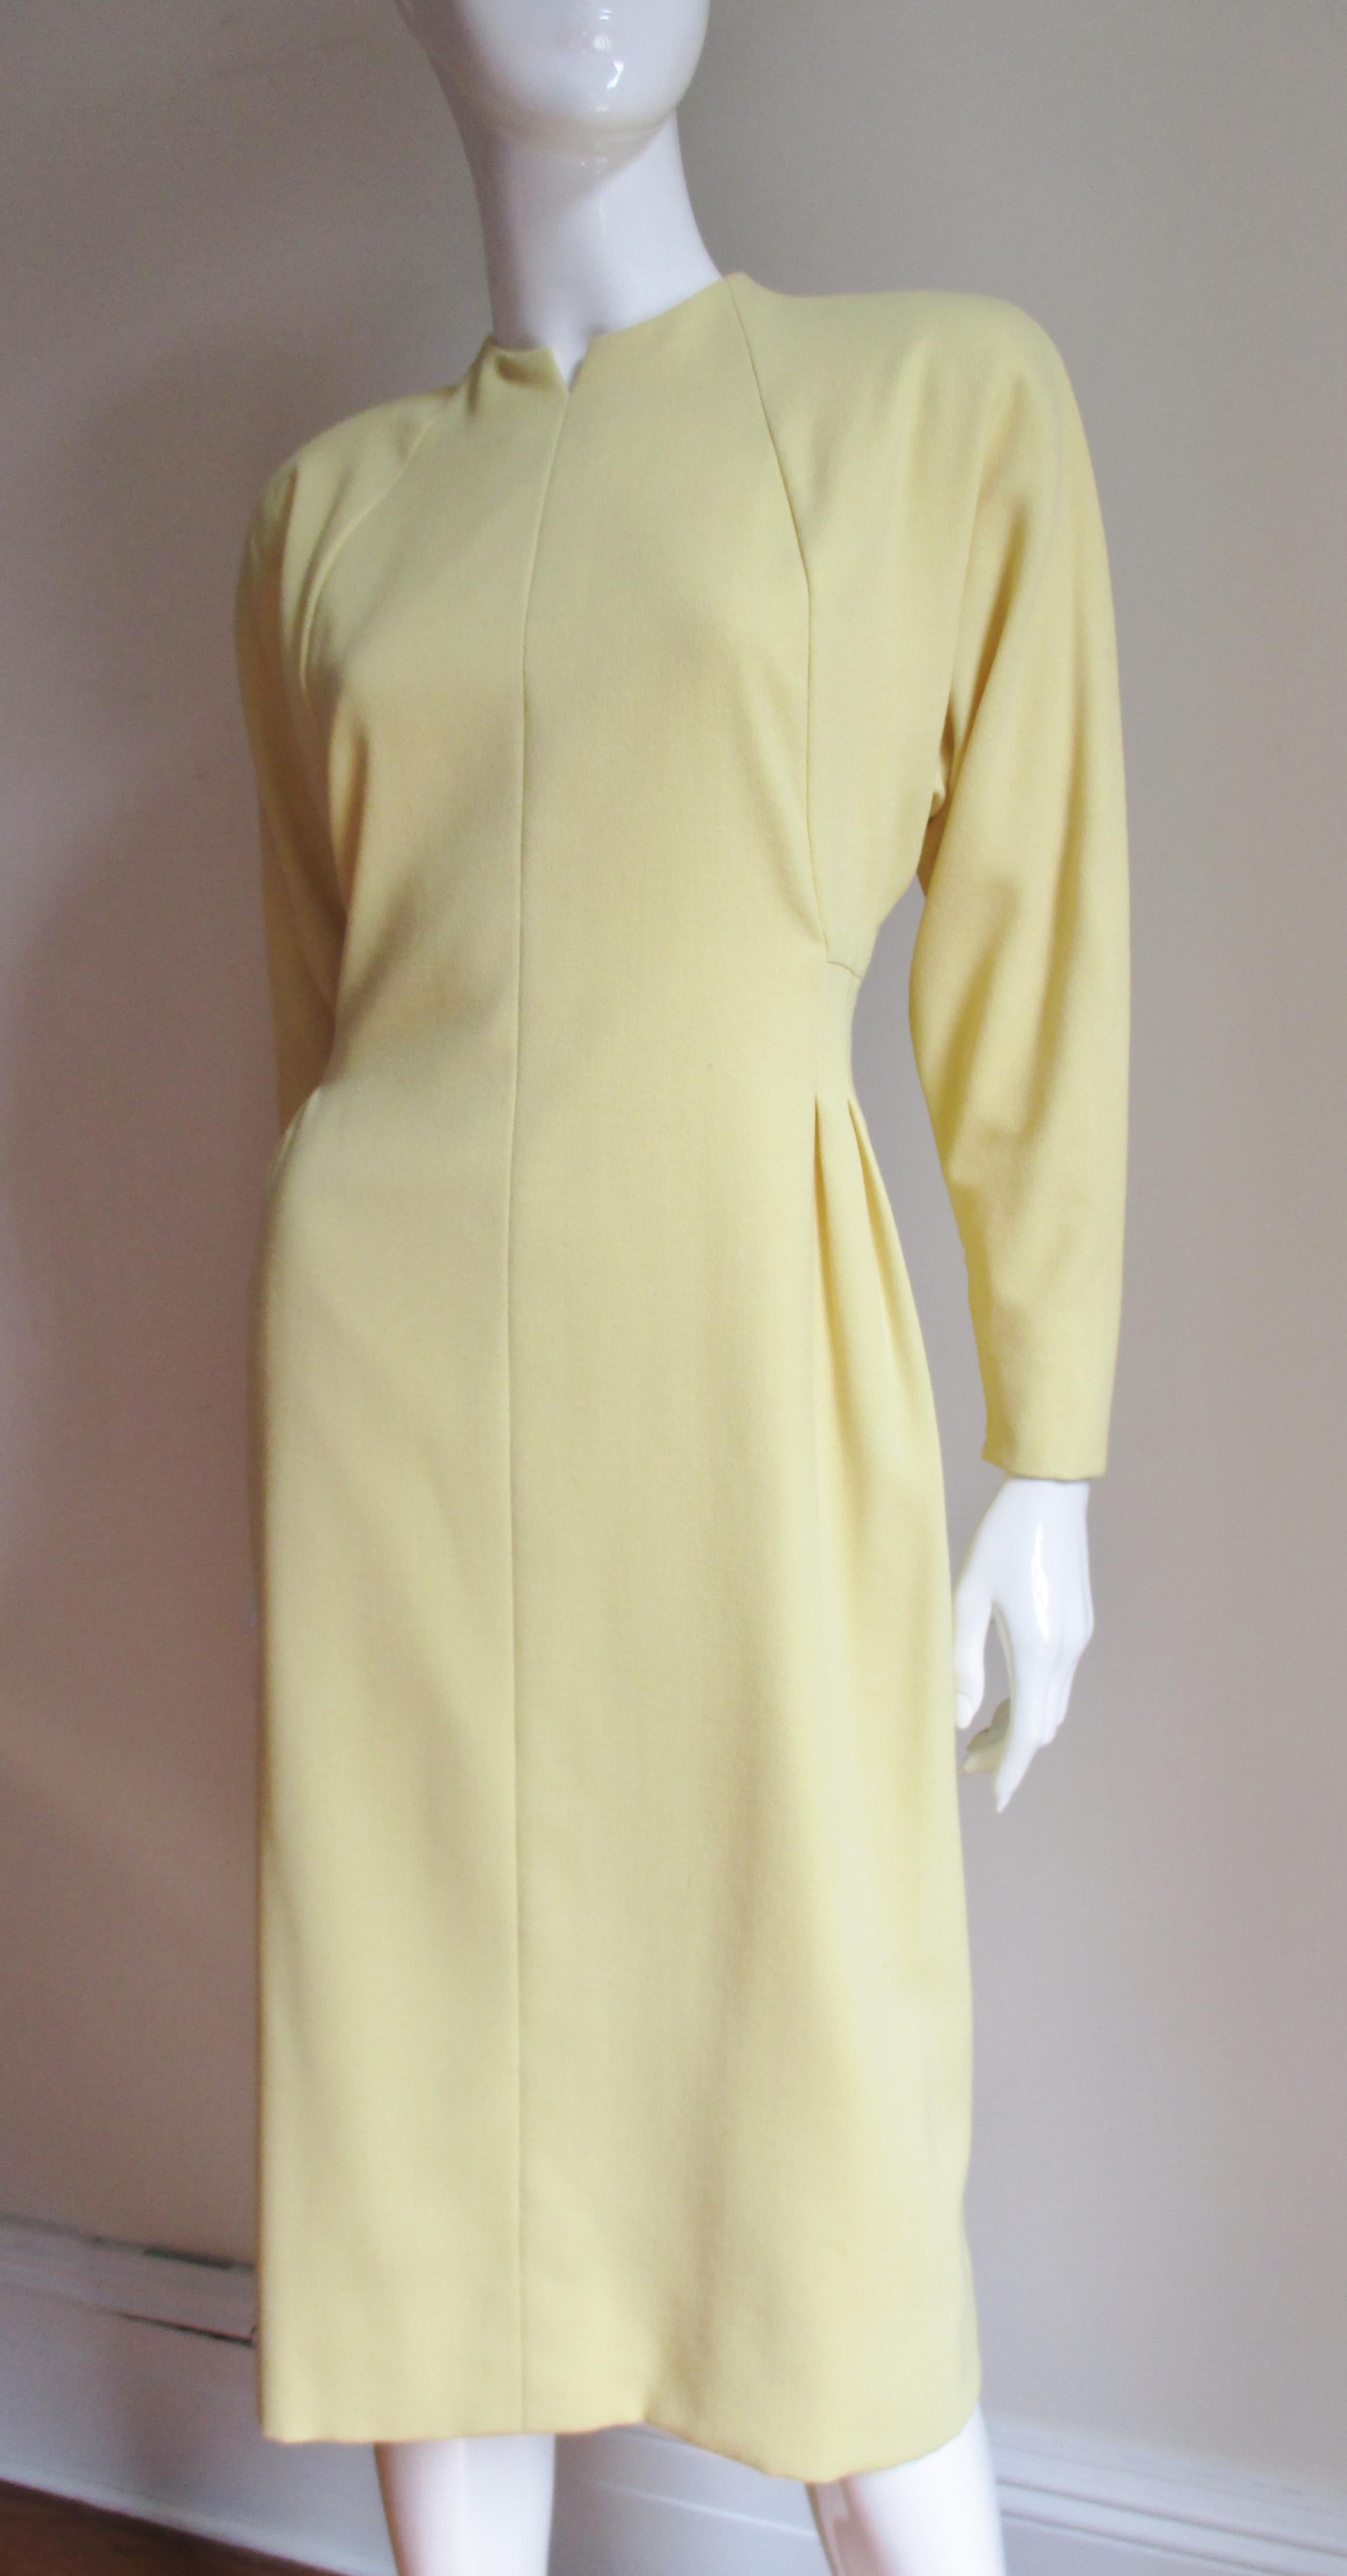 A pretty lemon yellow light weight wool dress from Pauline Trigere.  It has a notched crew neckline, light shoulder padding and dolman sleeves with zipper cuffs.  There is angled seaming on the bodice front and back creating flattering lines and the